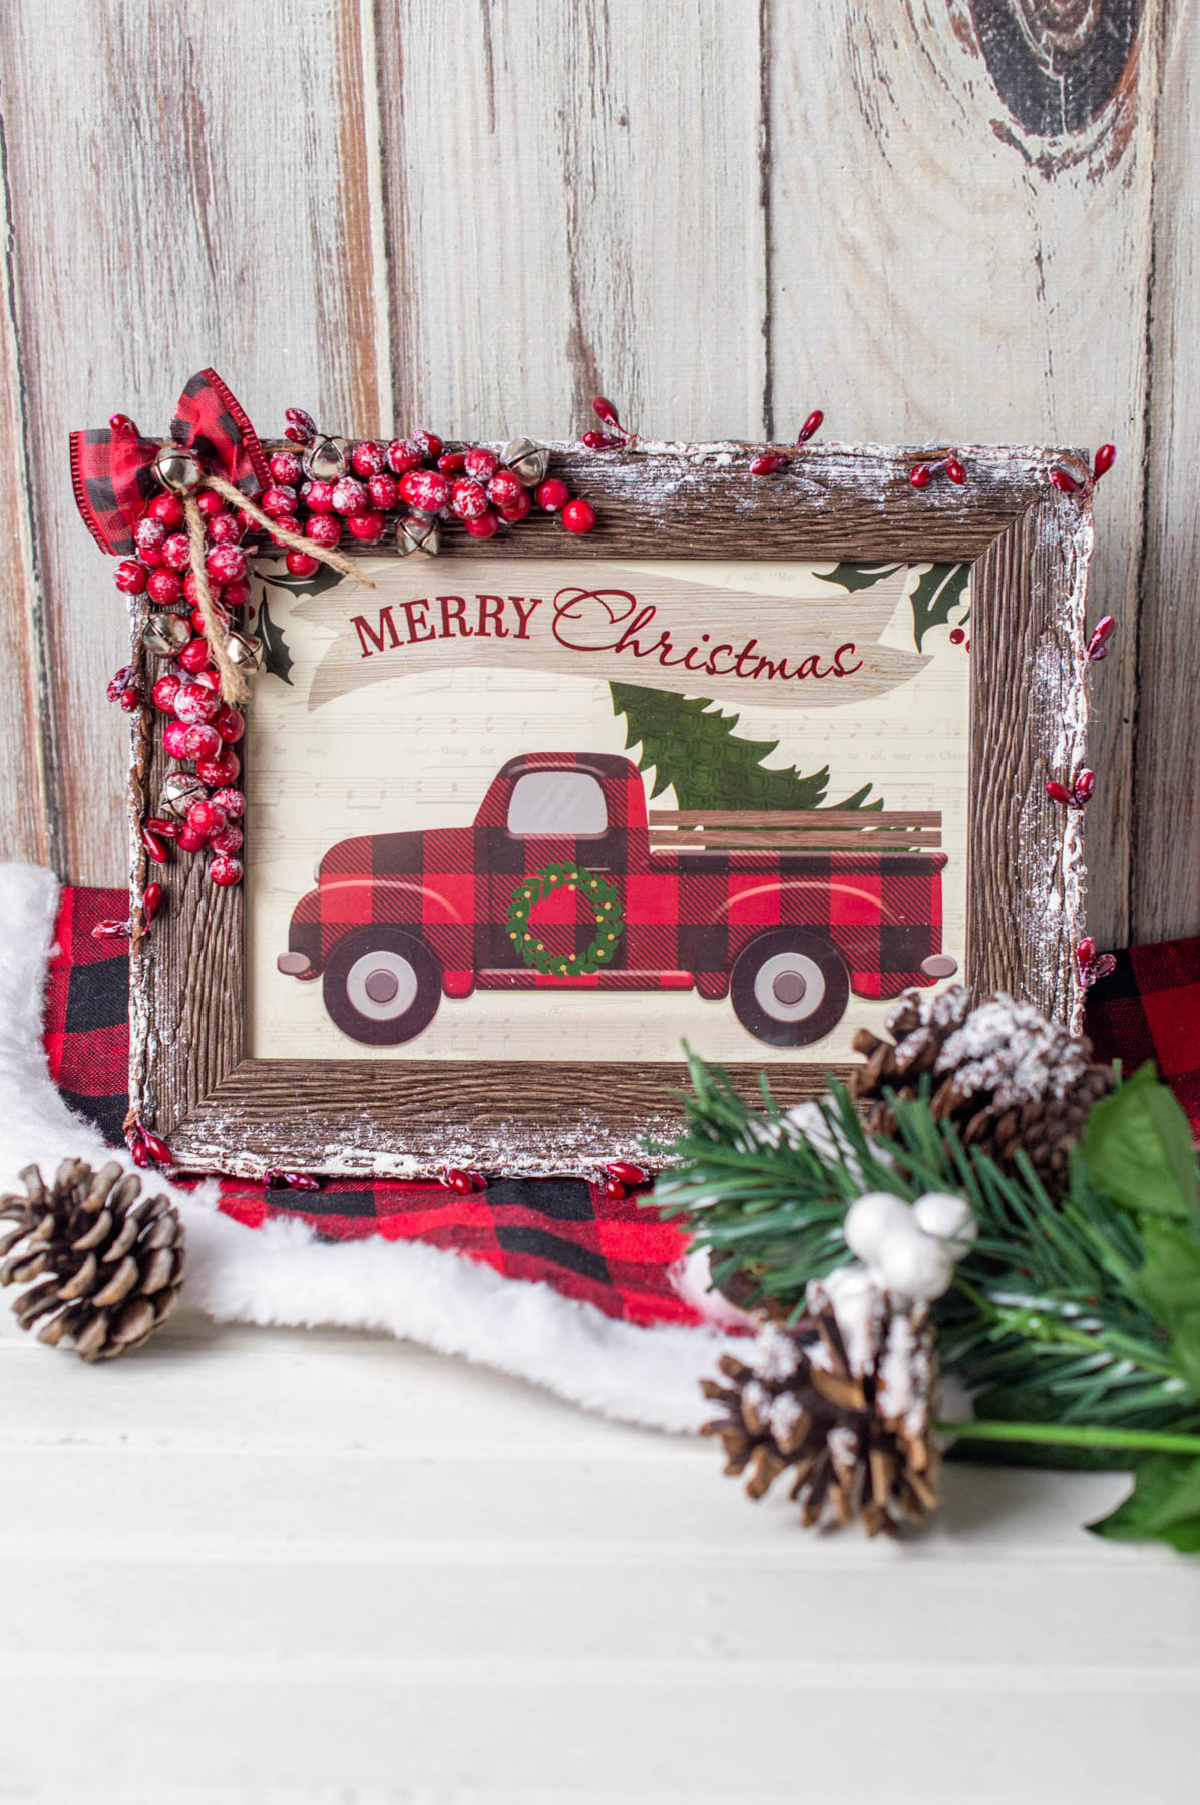 A merry christmas truck framed with holly and pine cones.